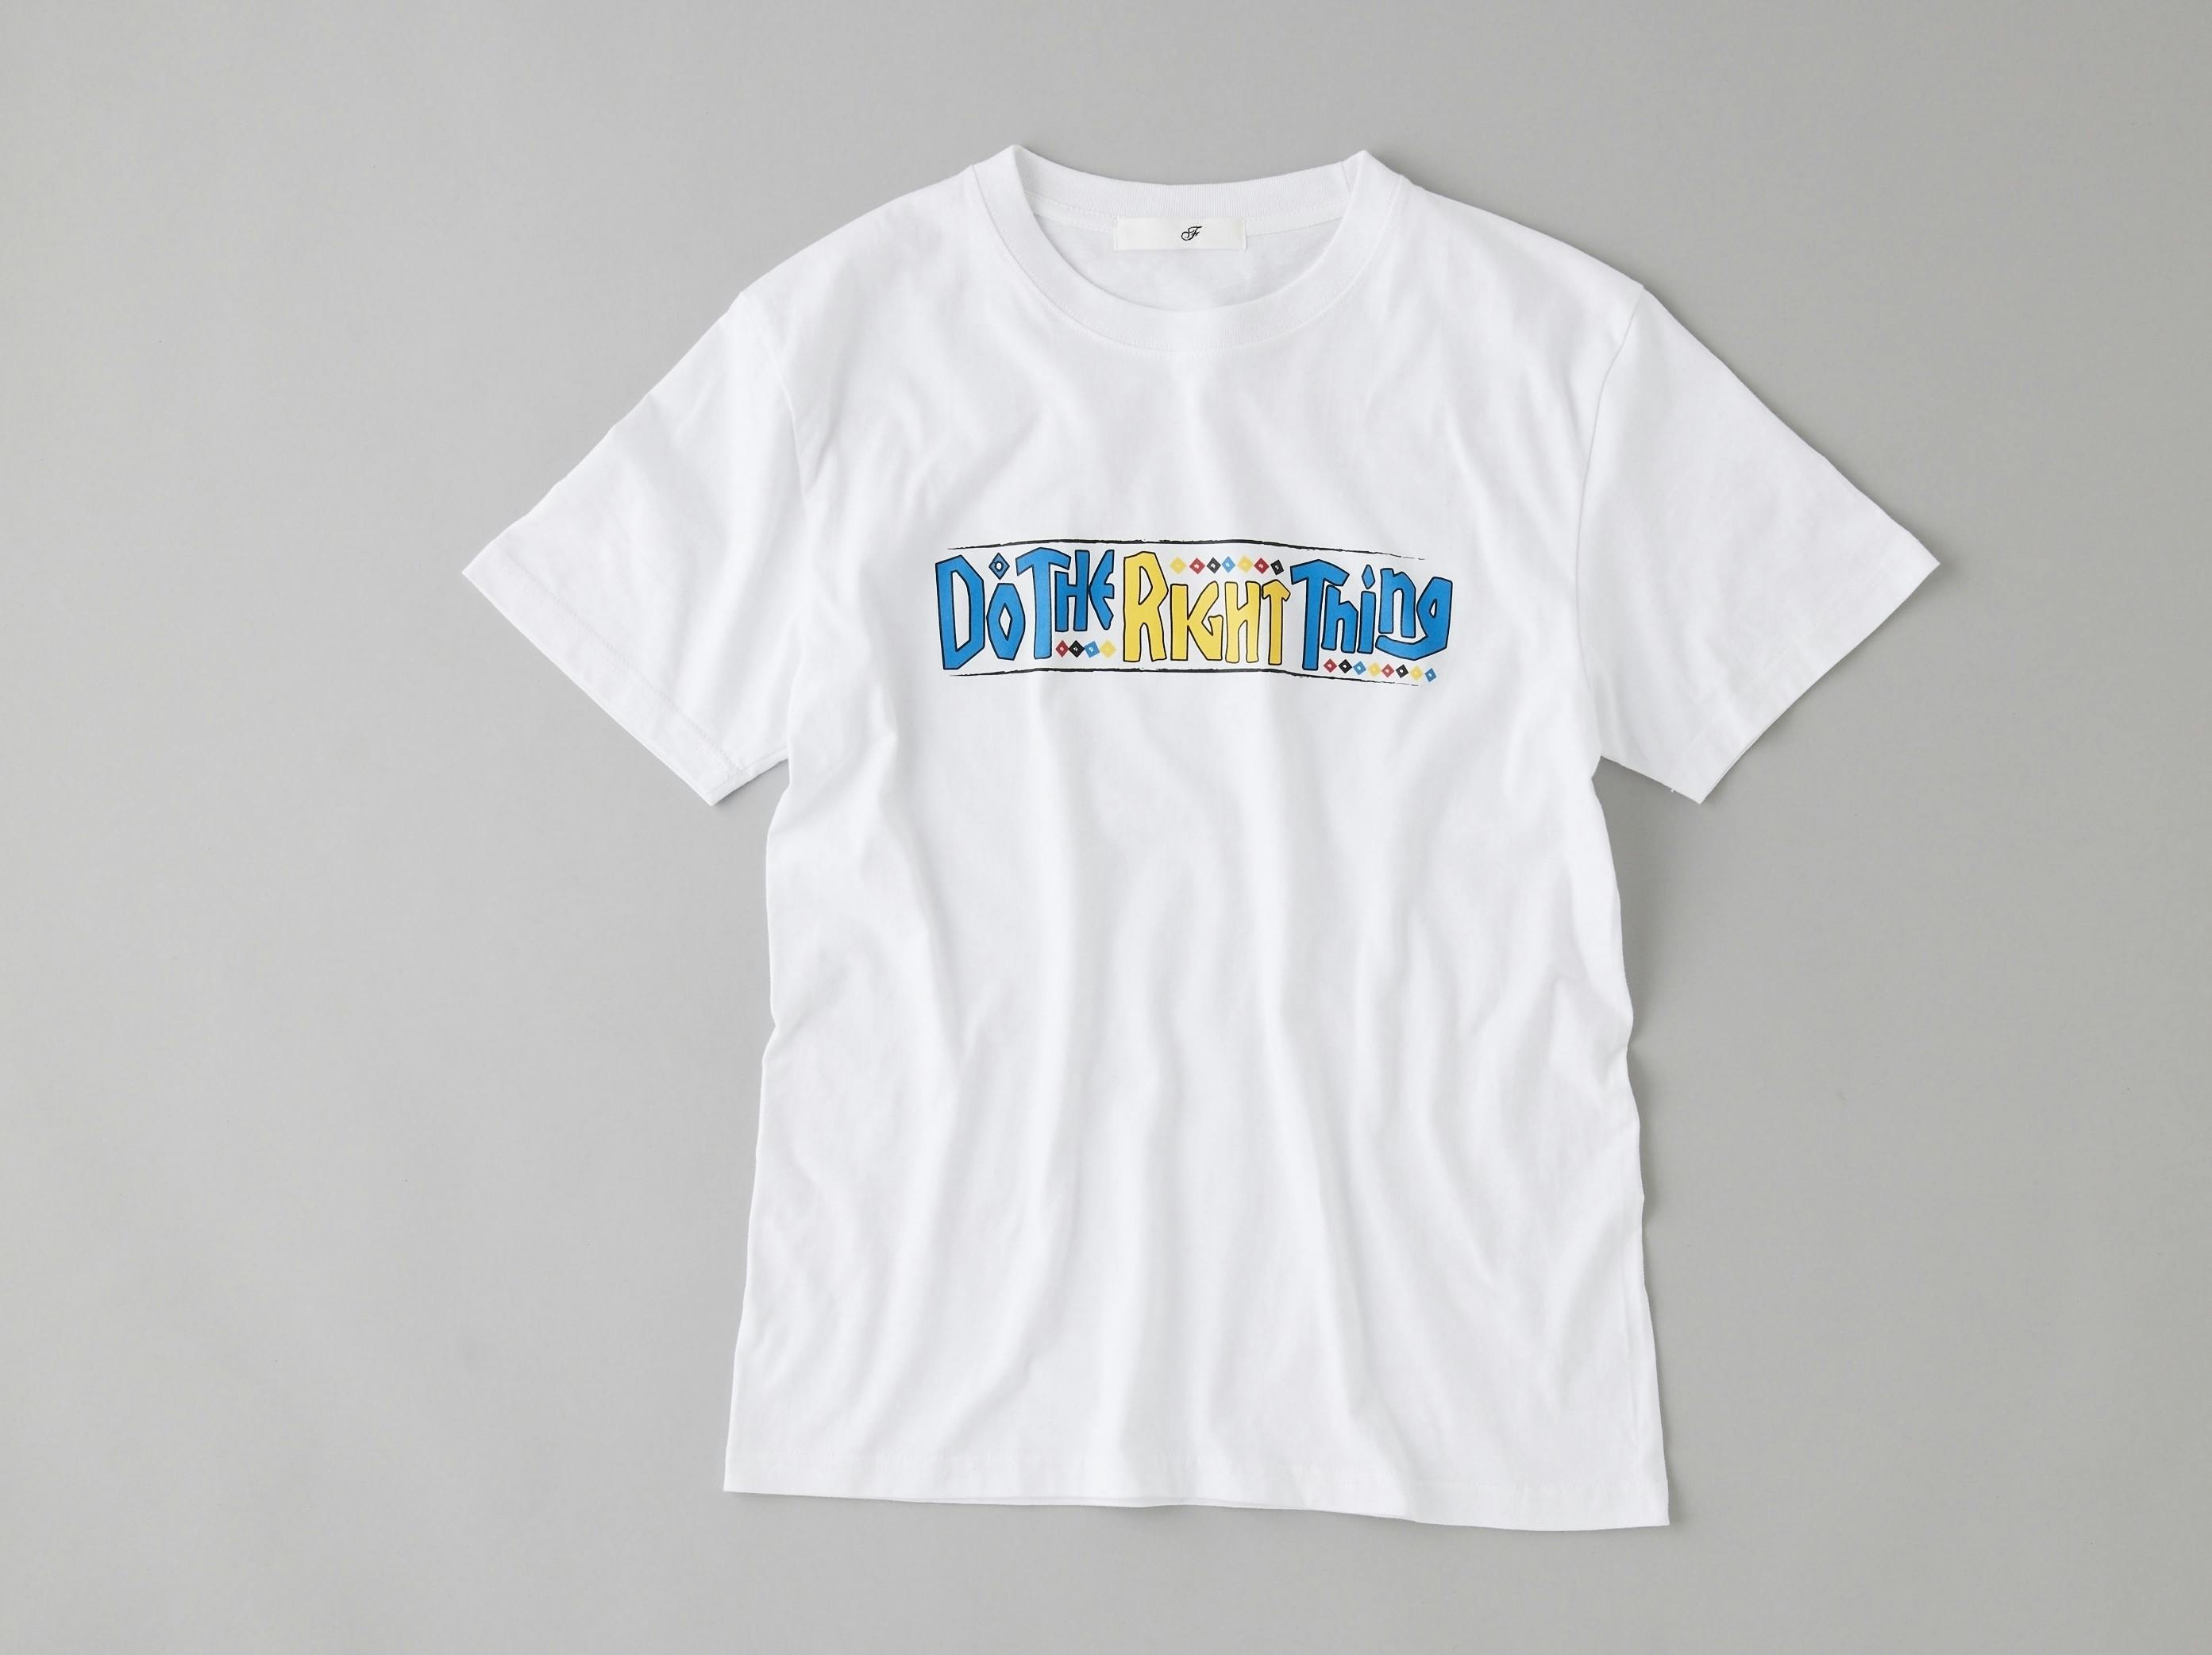 re):pro #001＿『DO THE RIGHT THING』Tシャツ！の支援者一覧 ...